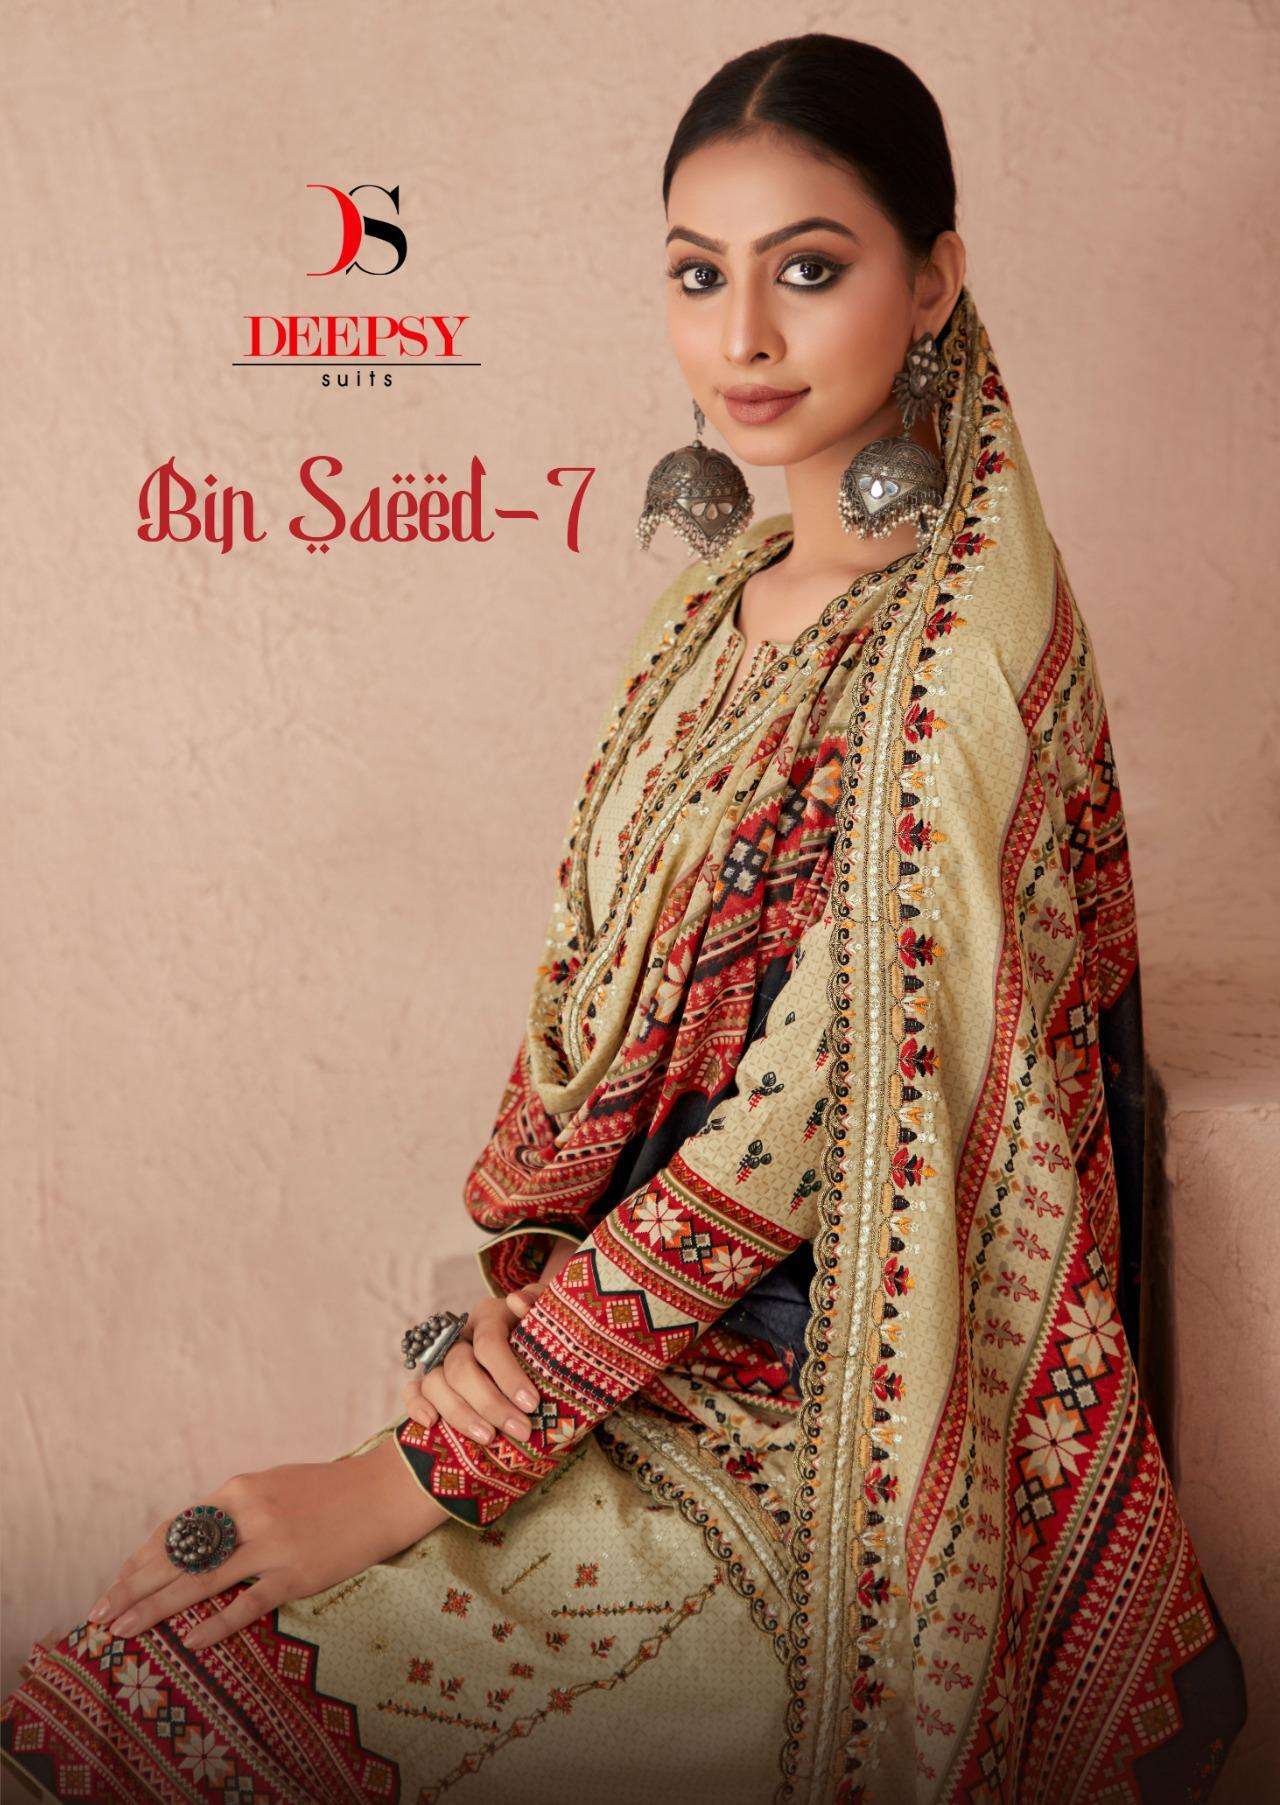 BIN SAEED VOL-7 BY DEEPSY SUITS 29001 TO 29006 SERIES COTTON PAKISTANI DRESSES